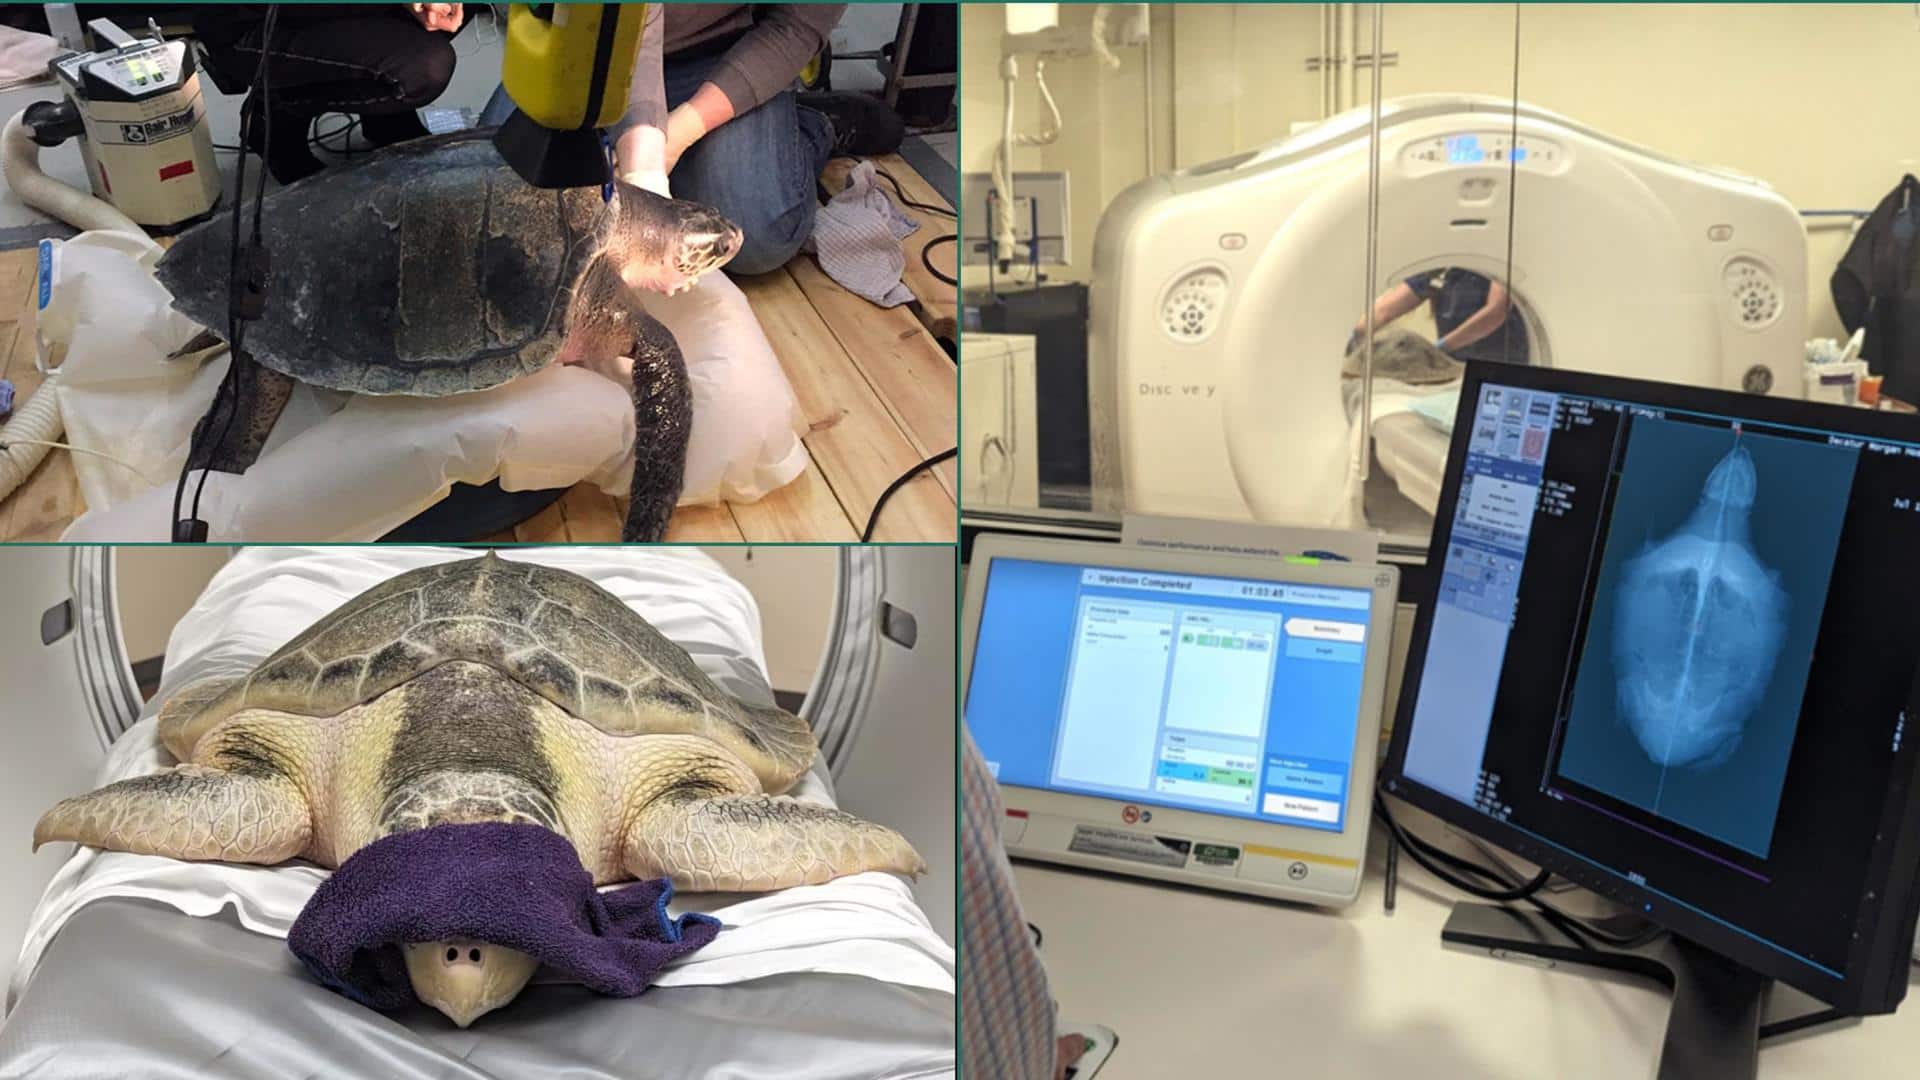 Alabama: Turtle gets CT scan, becomes hospital's first animal patient